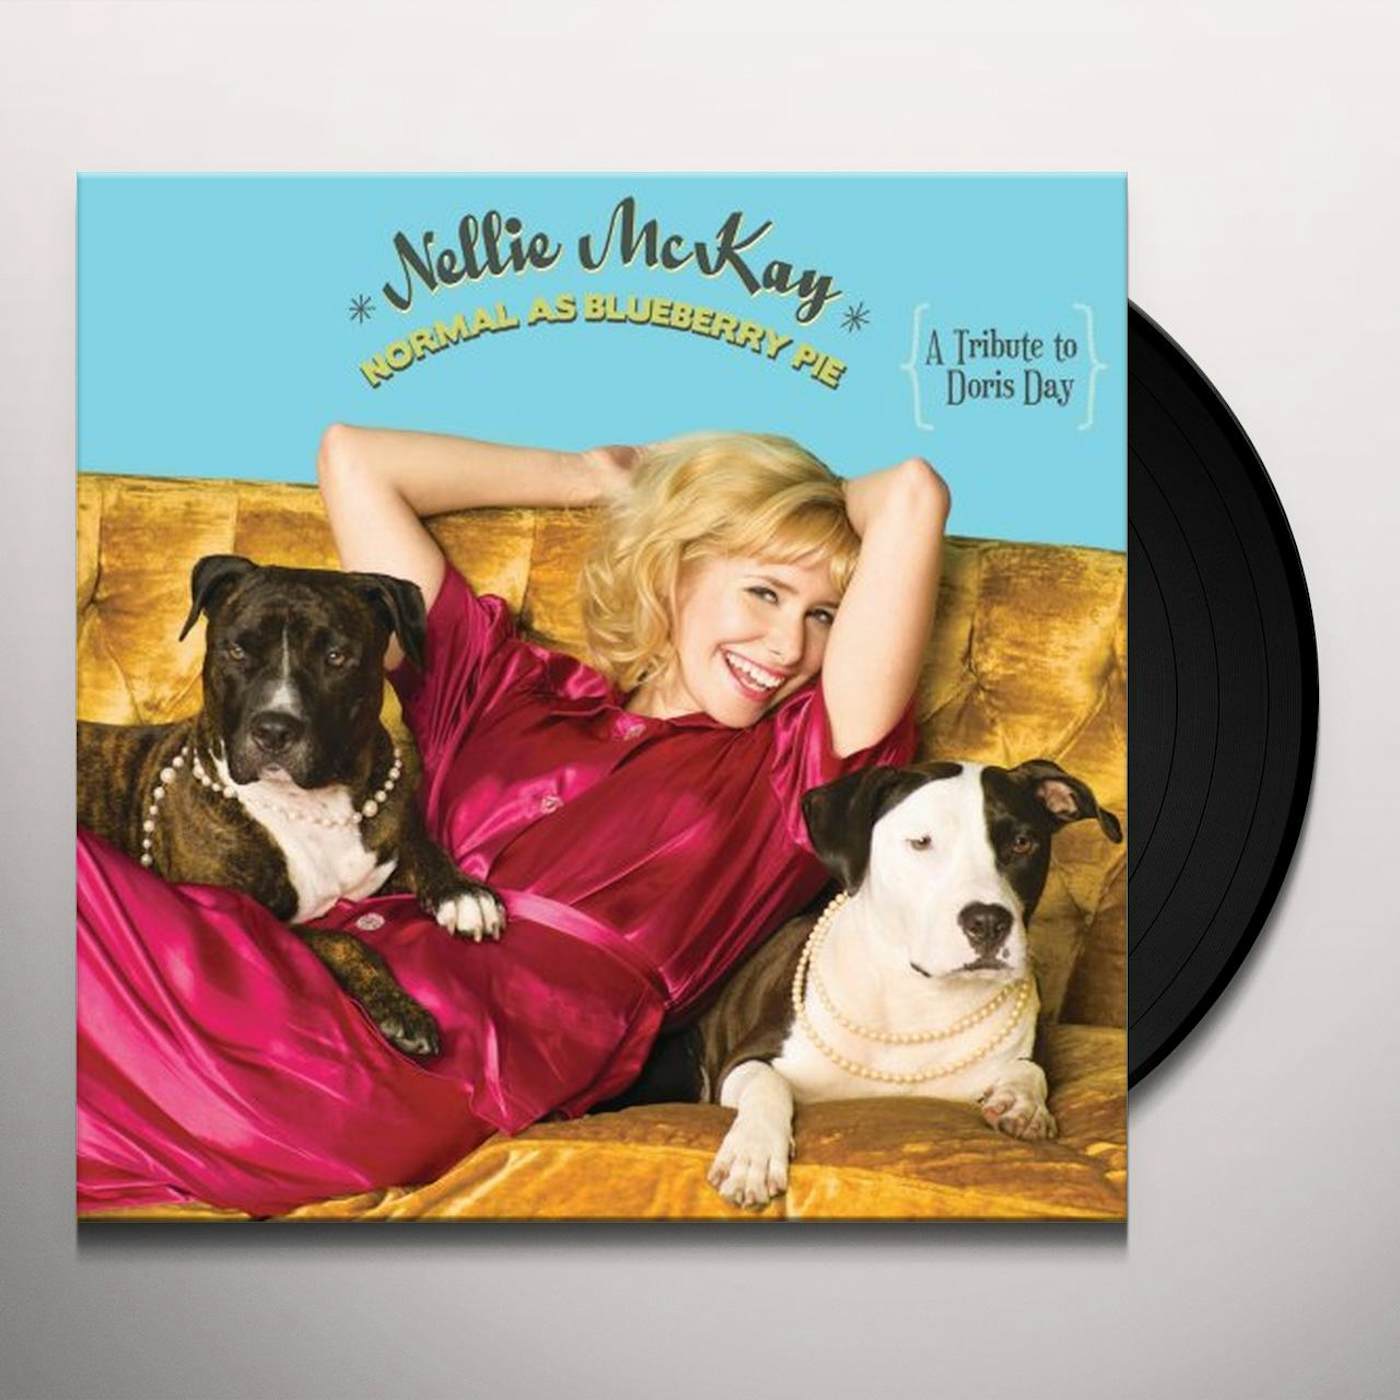 Nellie McKay NORMAL AS BLUEBERRY PIE: A TRIBUTE TO DORIS DAY Vinyl Record